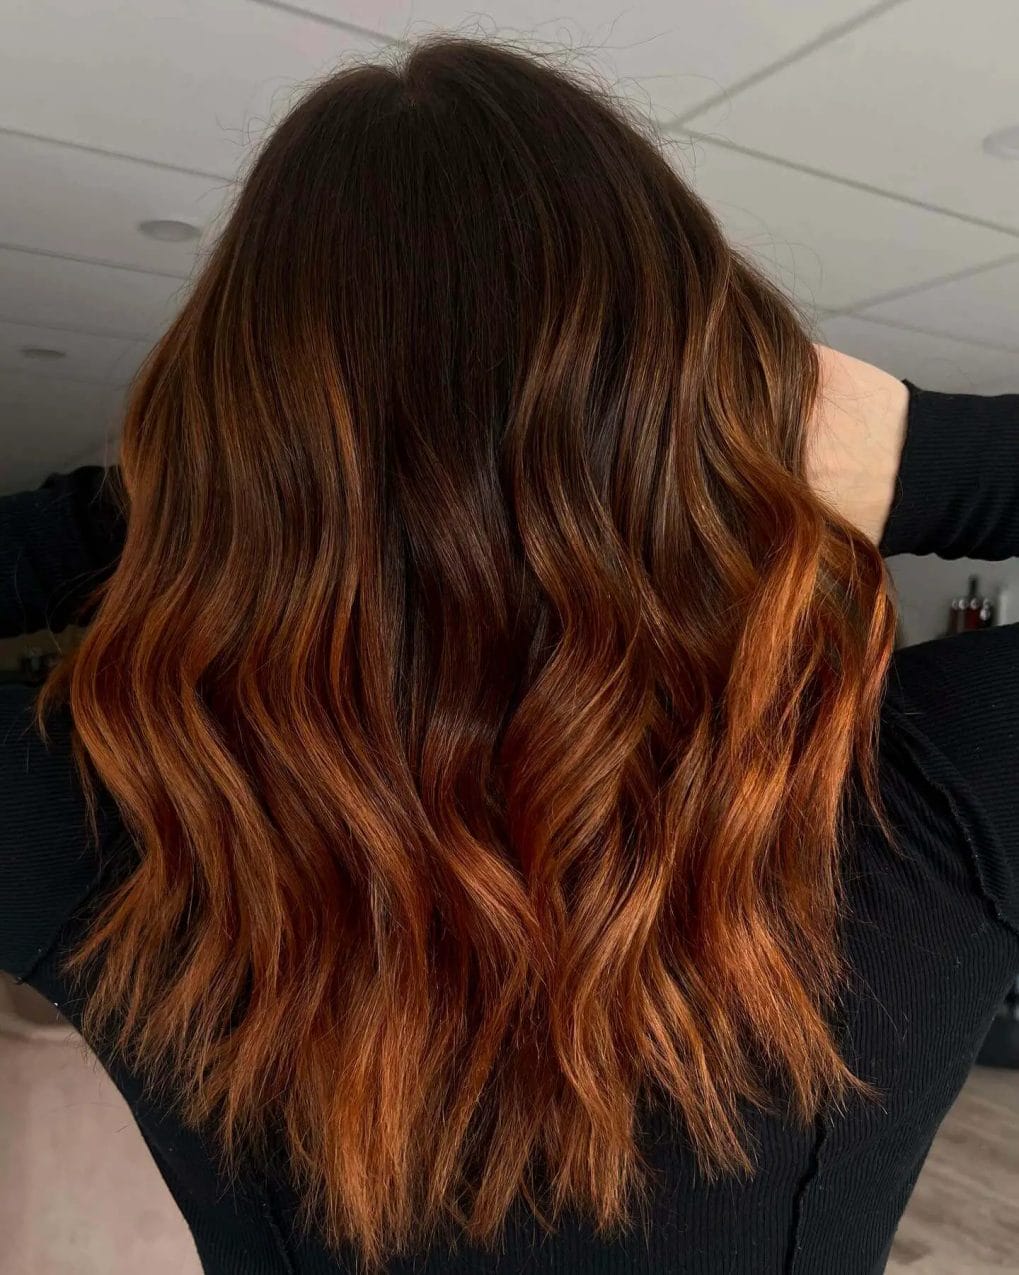 Dimensional copper hair transitioning from dark roots to fiery ends with bouncy waves.